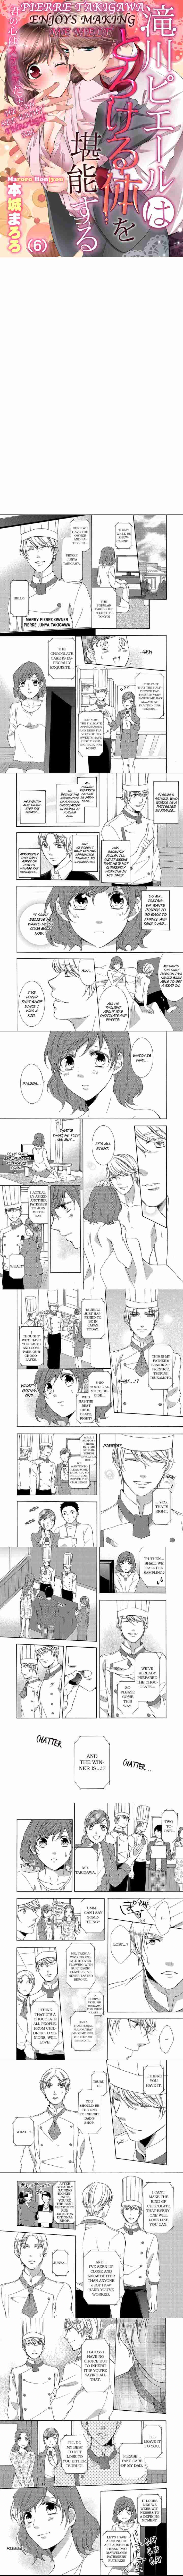 Pierre Takigawa Enjoys Making Me Melt / He can see right through me - Vol.1 Ch.6 ( END )